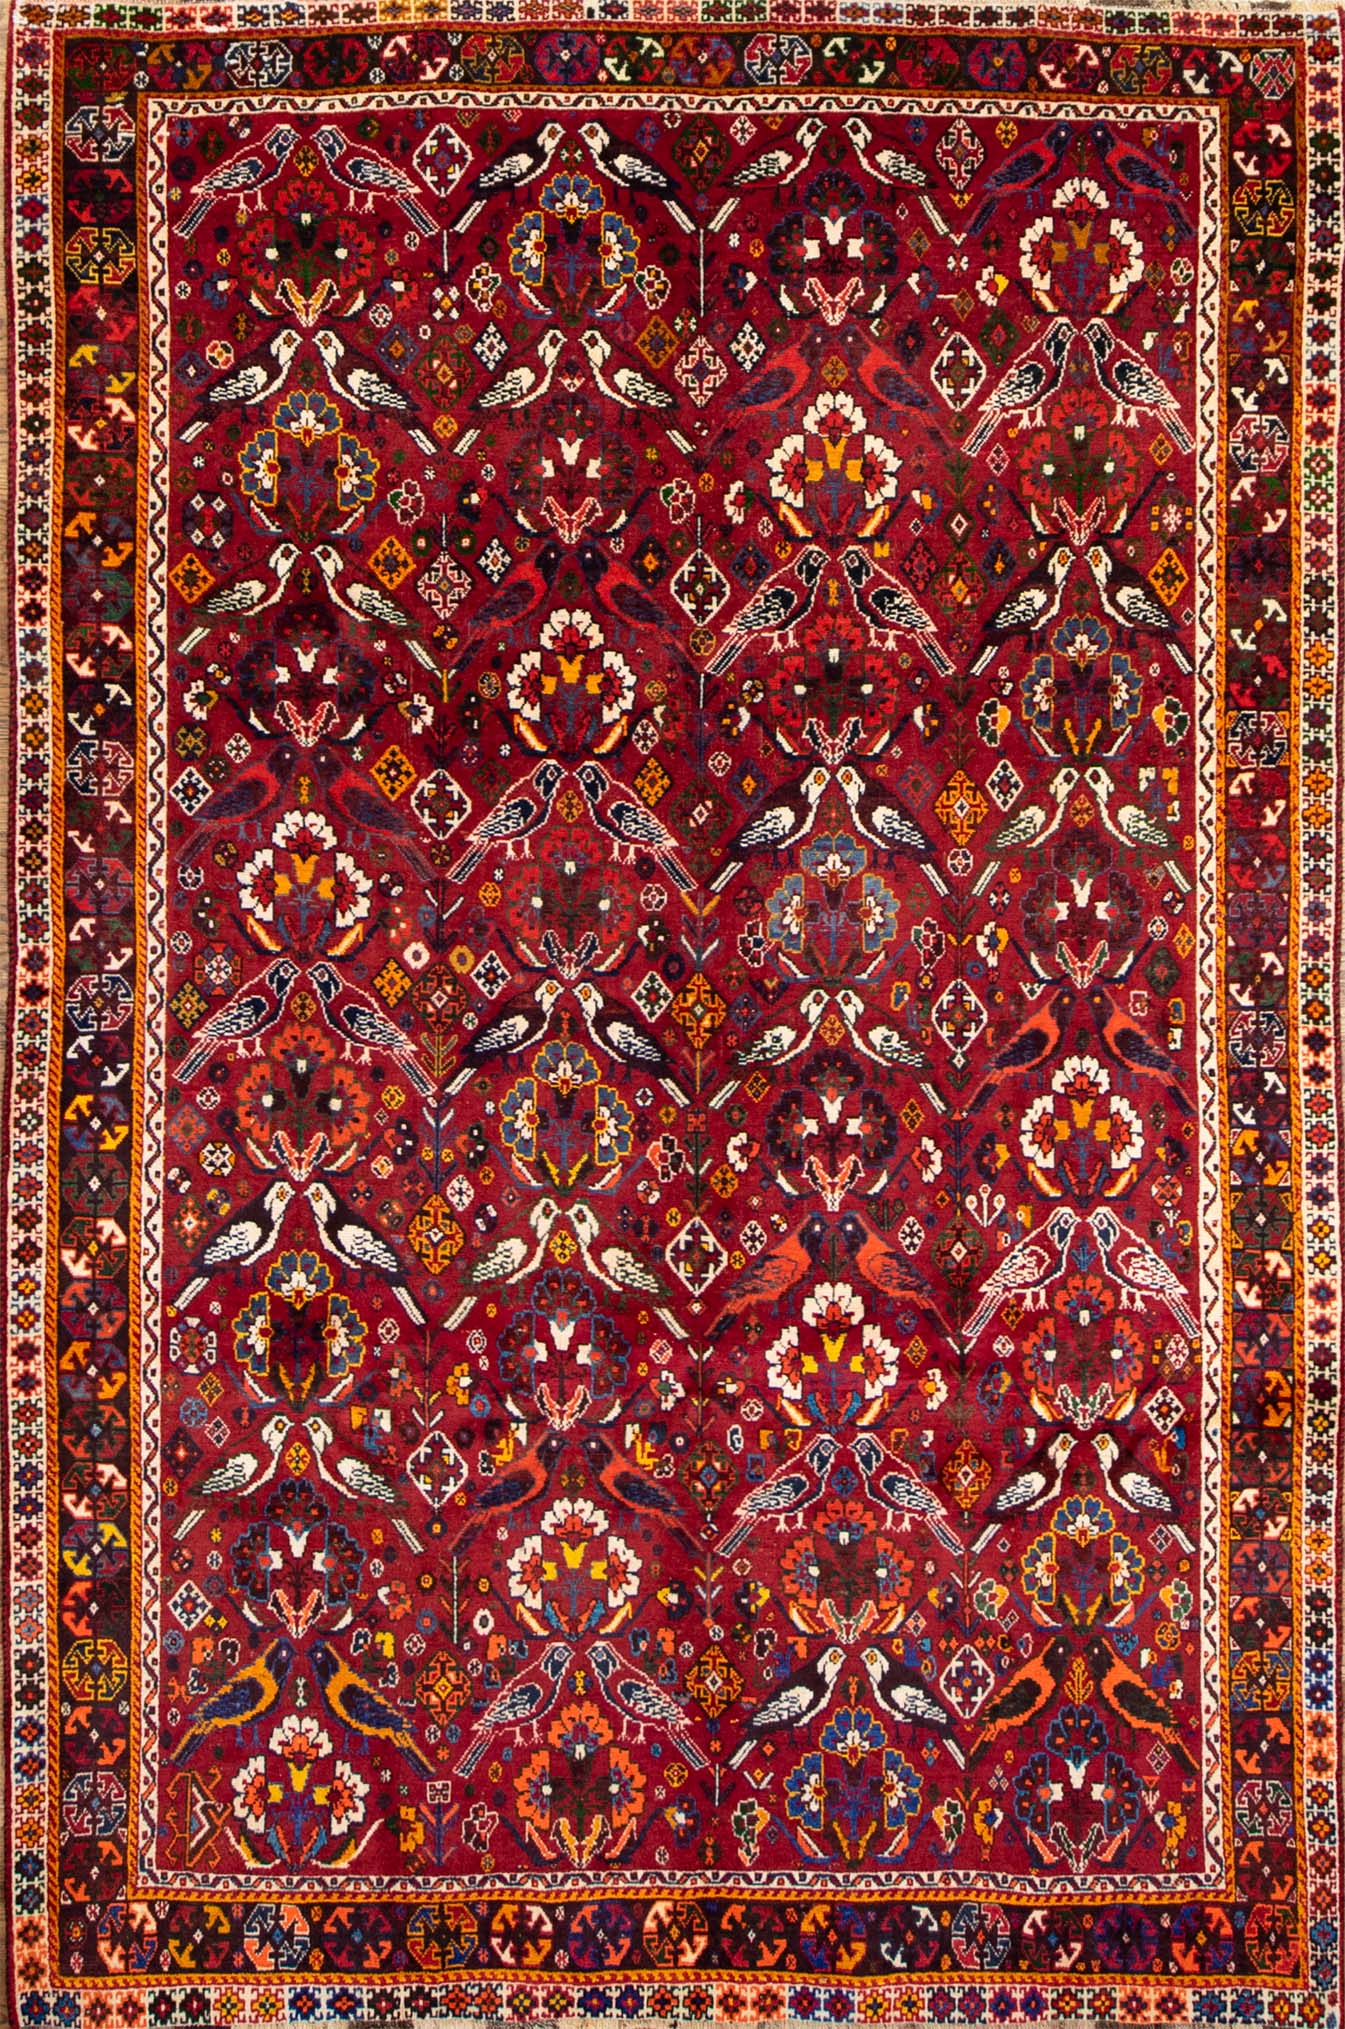 Red Persian rug. Handmade Persian Shiraz wool rug with birds in red color. Size 7x10.5.